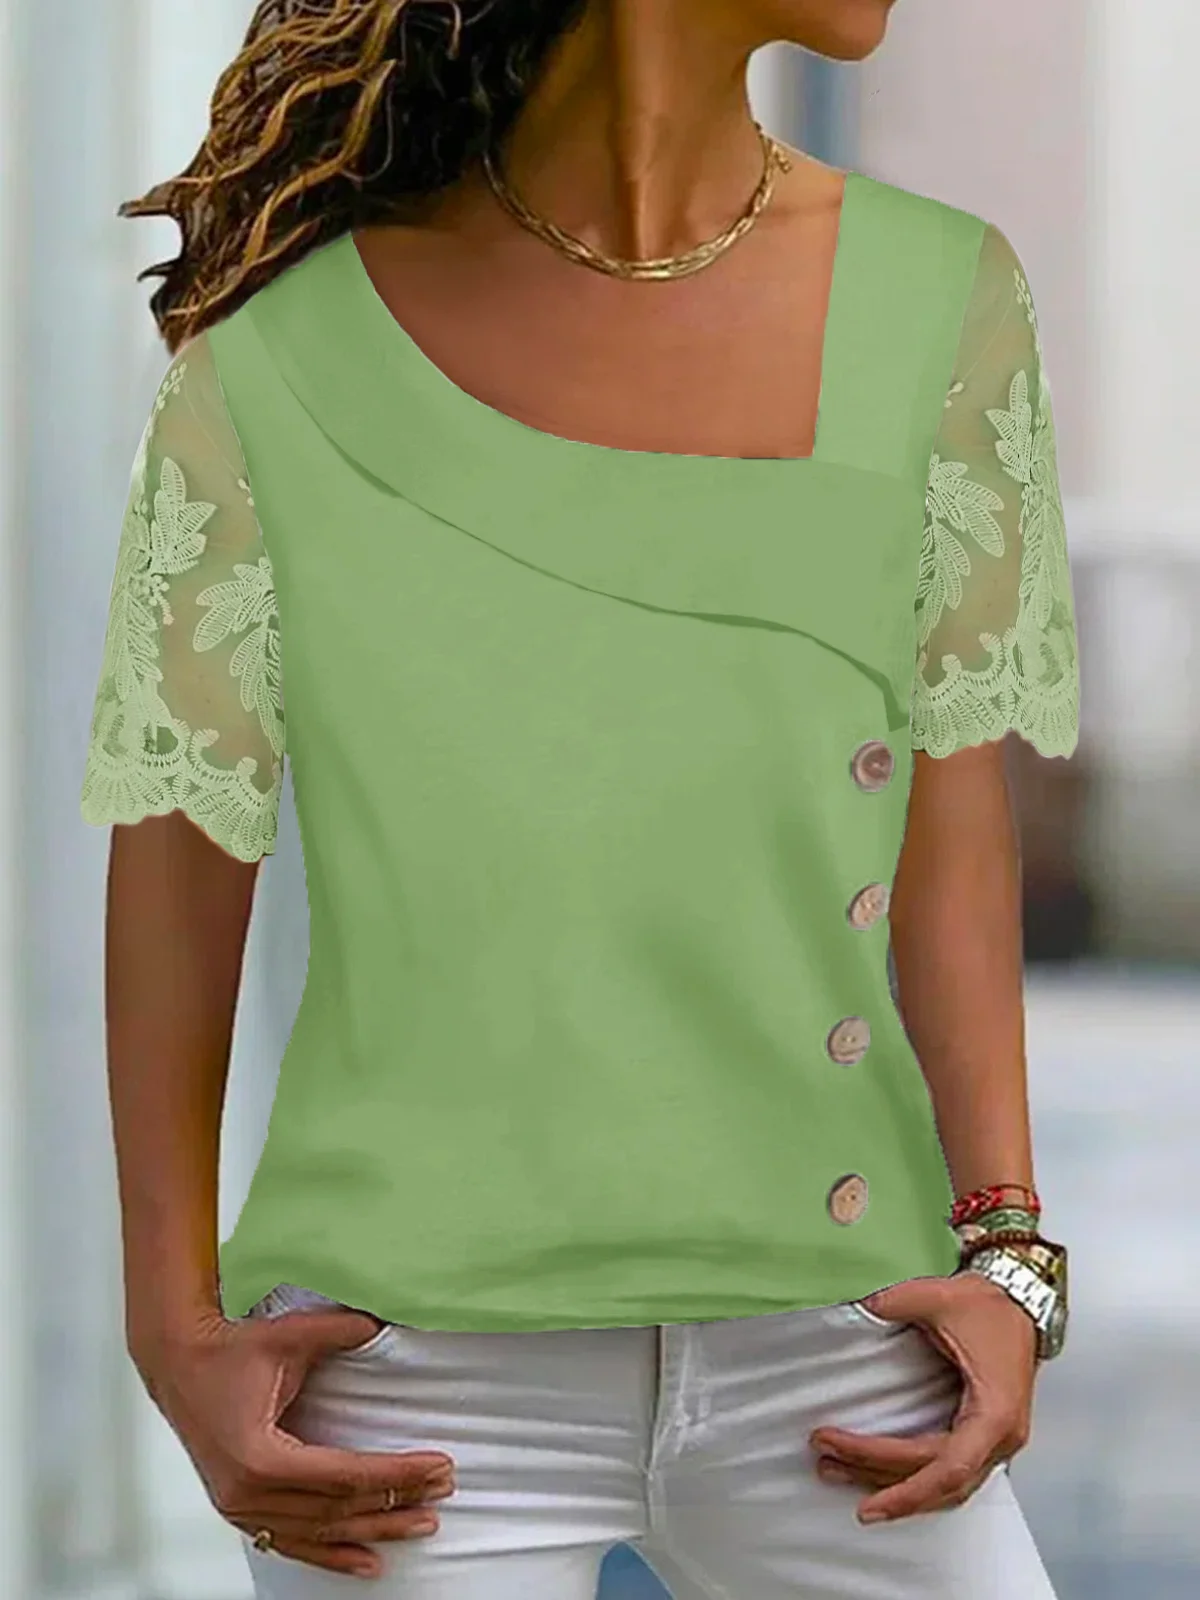 Casual Asymmetrical Neck Buttoned Design With Mesh Sleeve Shirt